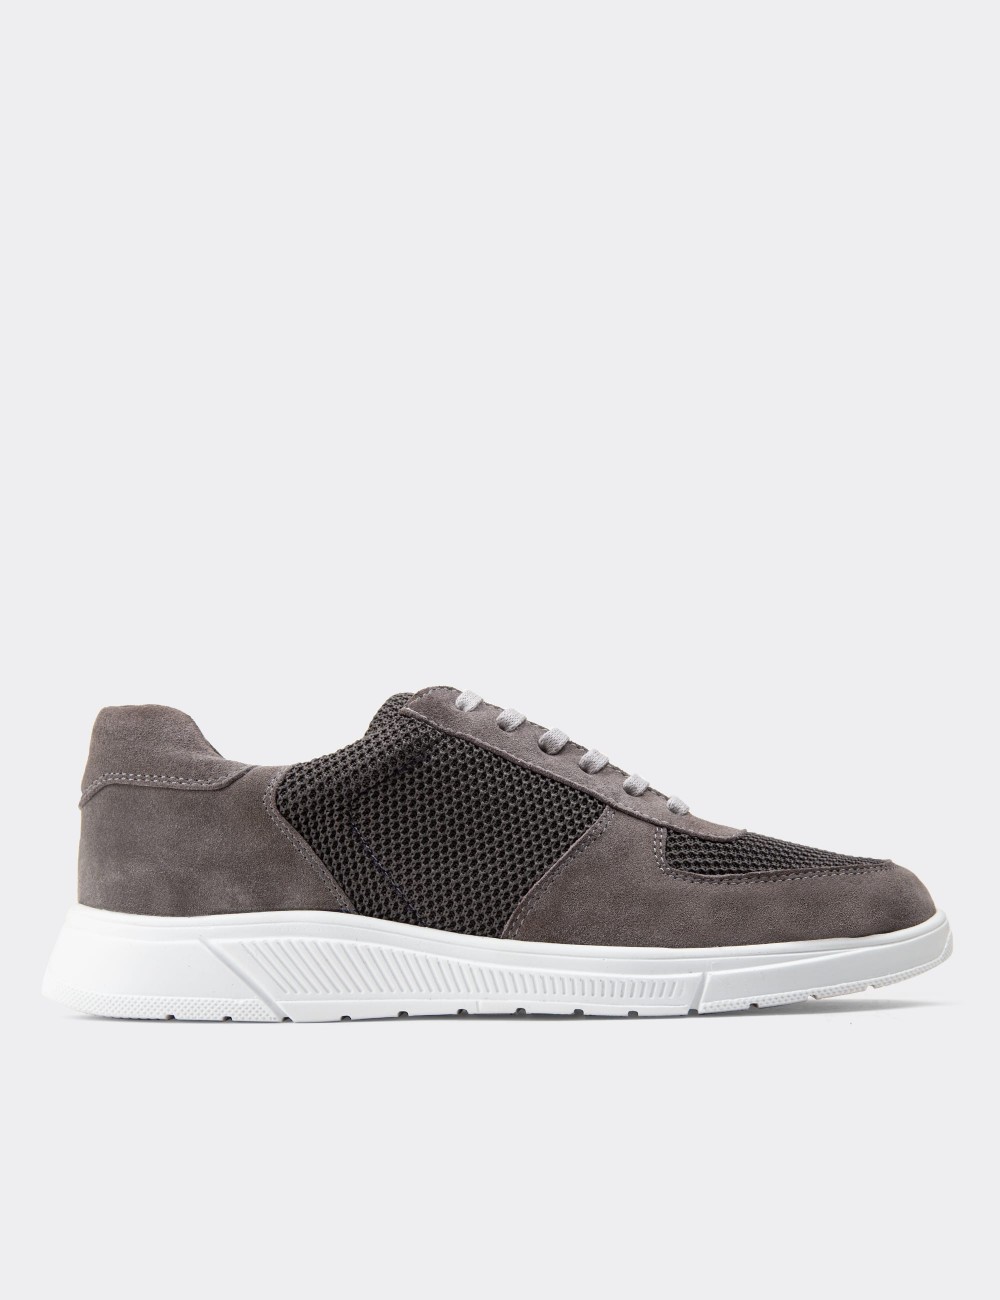 Gray Suede Leather Sneakers - 01860MGRIC01